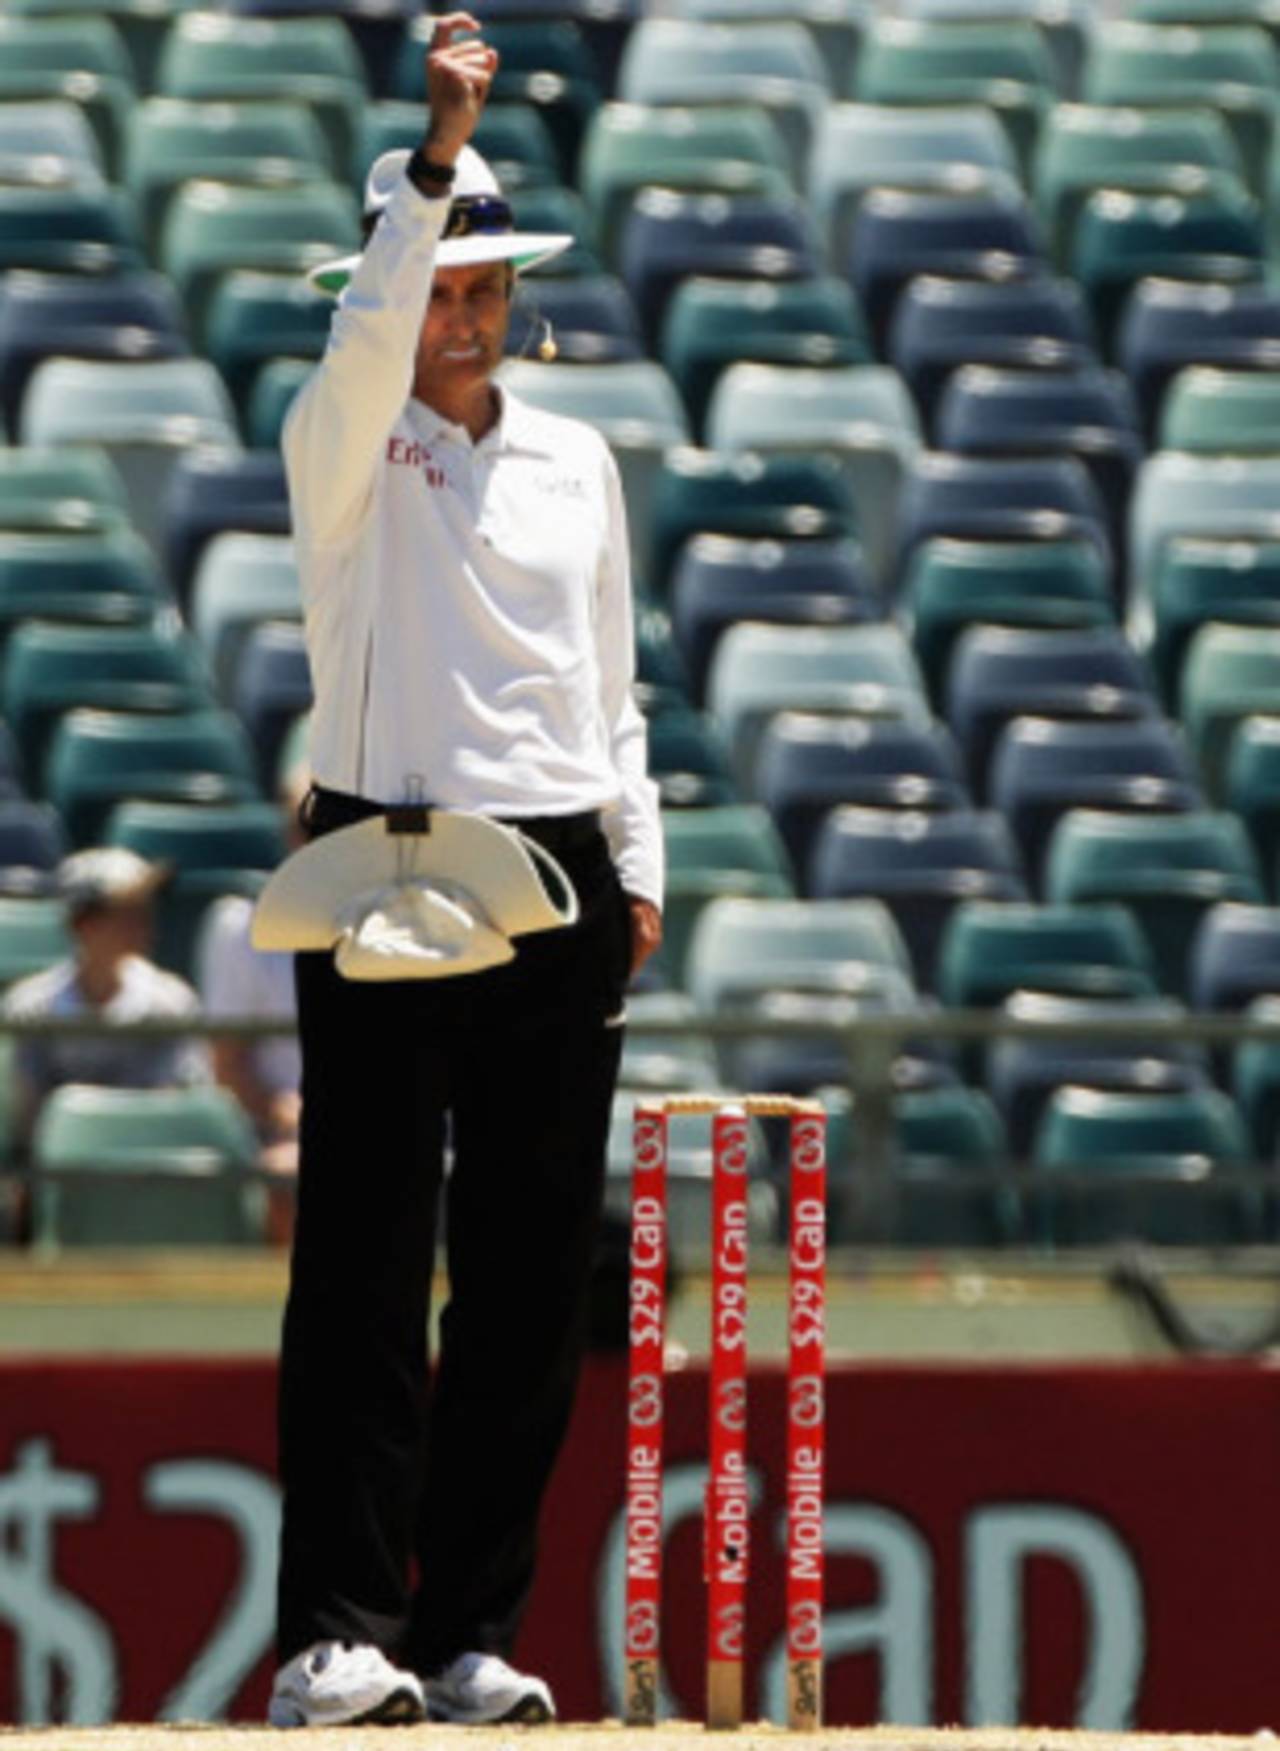 Billy Bowden's decision against Kemar Roach, which ended the third Test in Perth, raised further questions about the new review system&nbsp;&nbsp;&bull;&nbsp;&nbsp;Getty Images